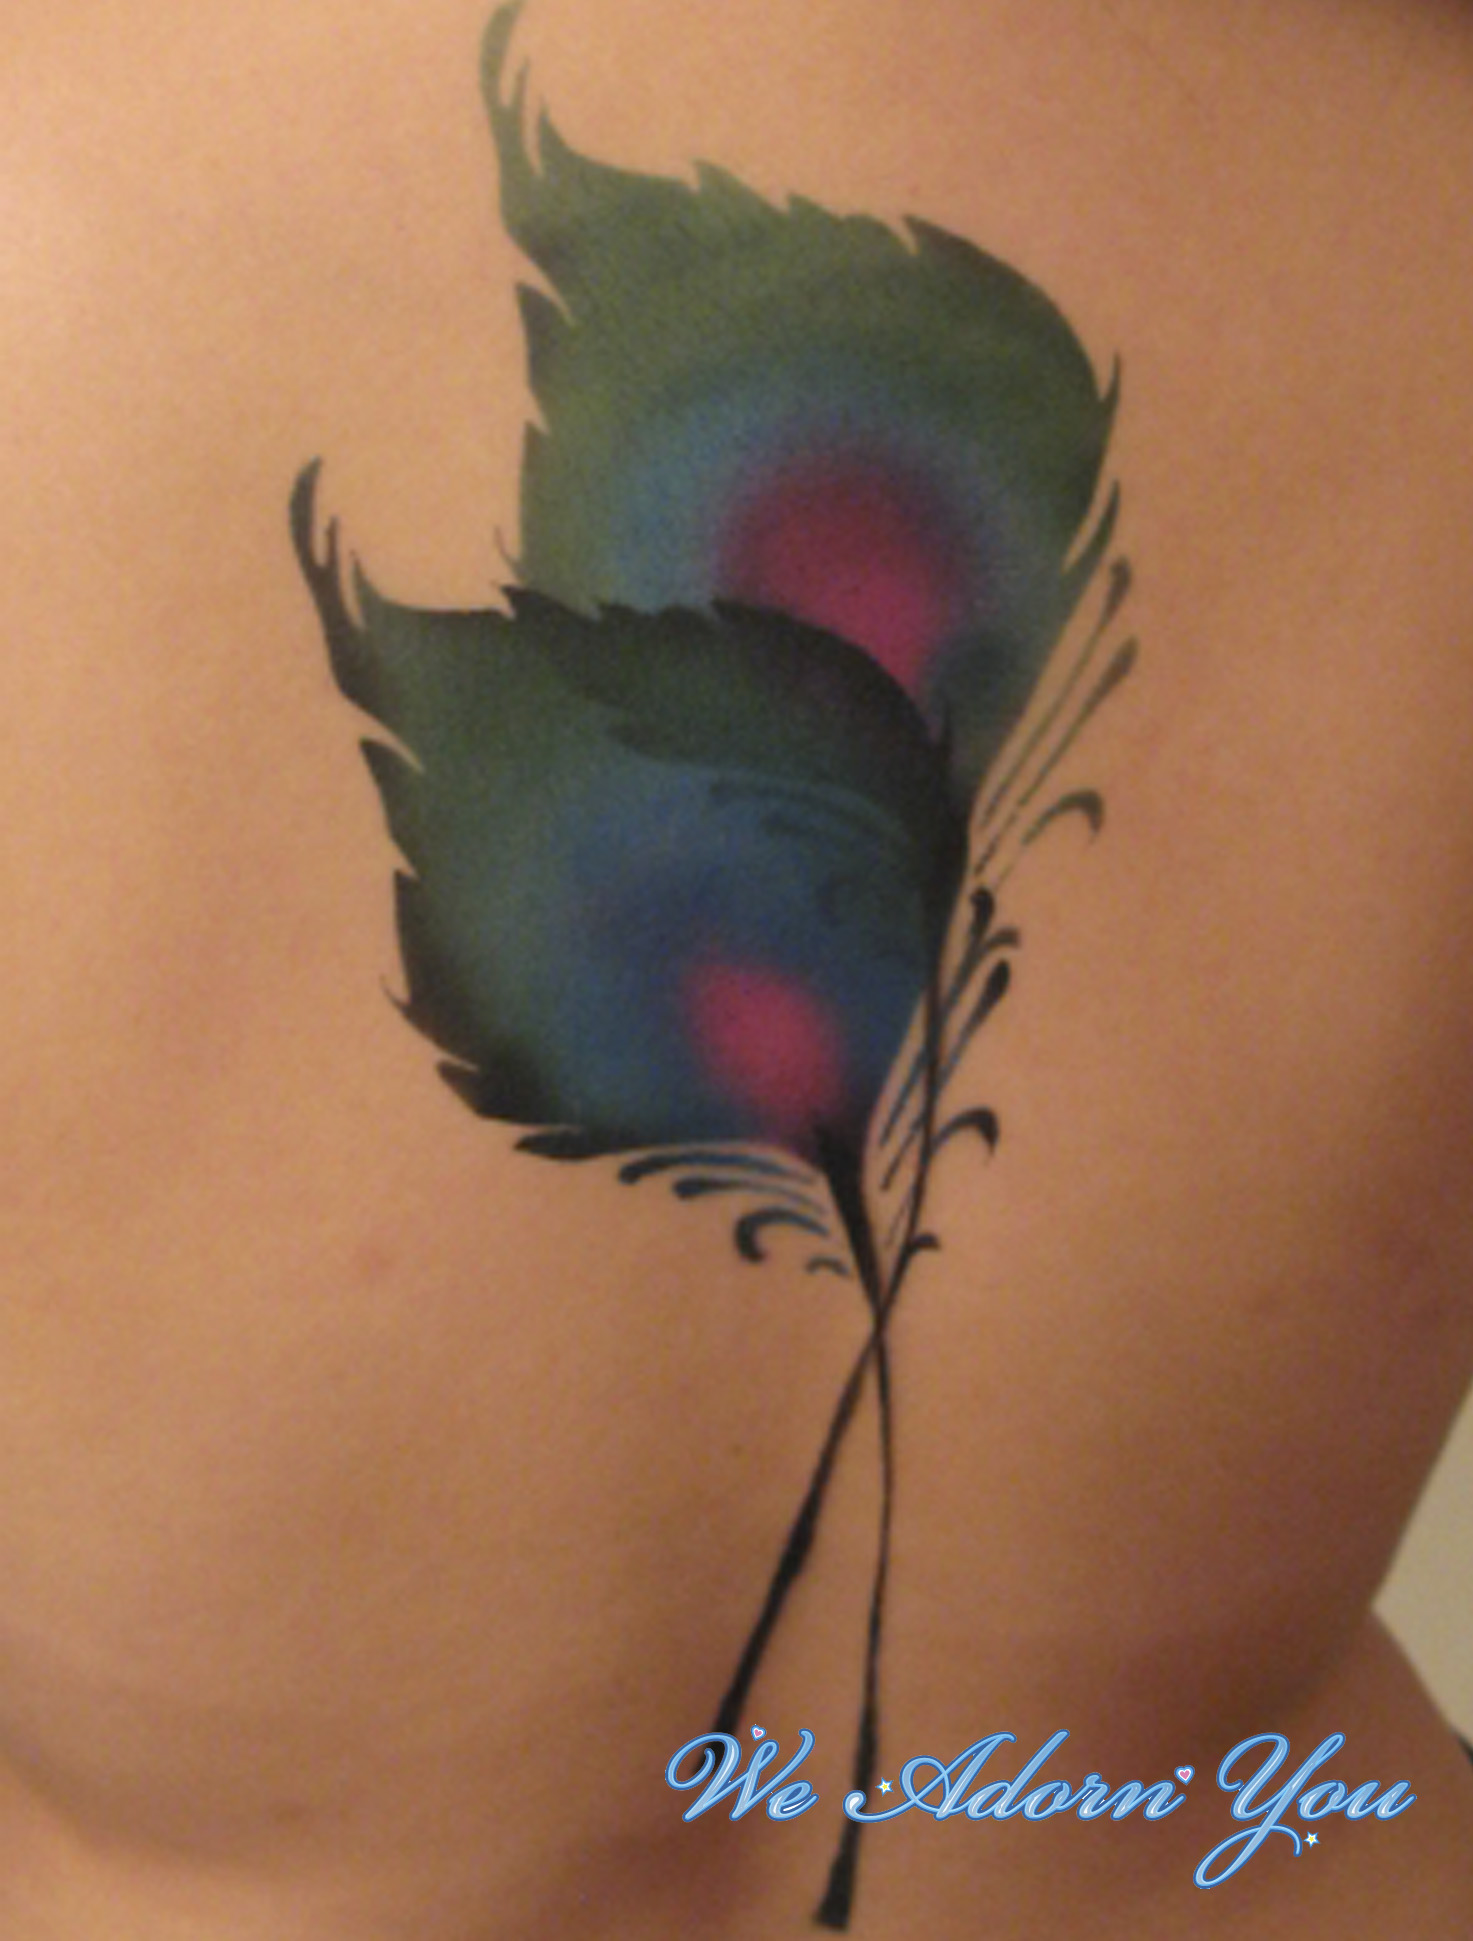 Body Painting Peacock Feather - We Adorn You.jpg